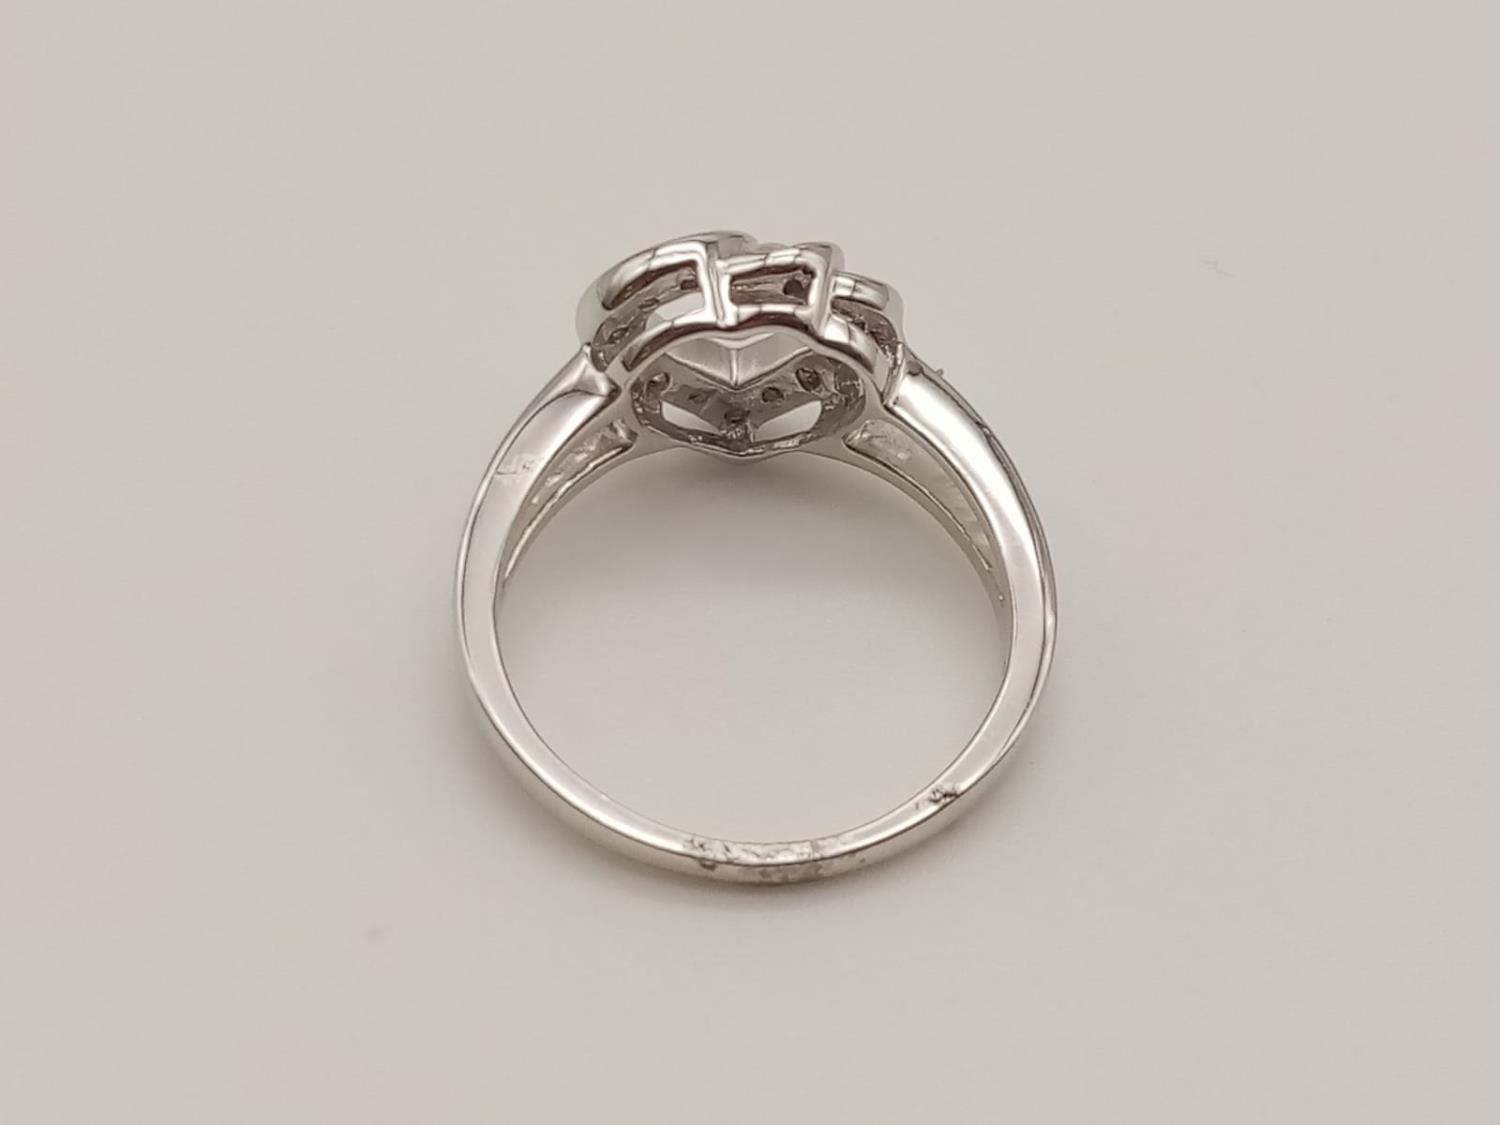 9k White gold DIAMOND SET HEART RING, weight 3.7g and approx 0.25ct diamonds, size O - Image 3 of 6